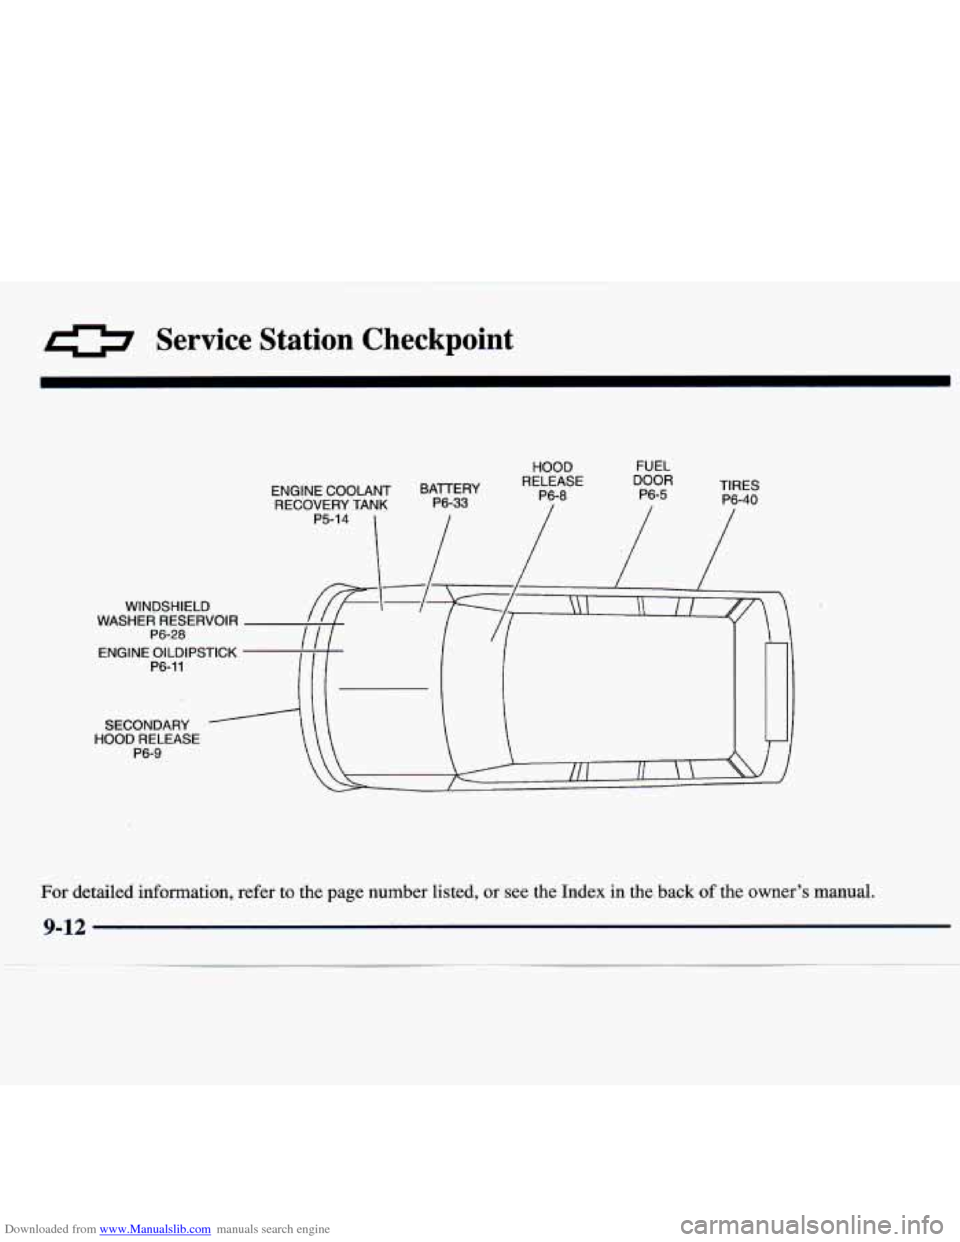 CHEVROLET TRACKER 1998 1.G Owners Manual Downloaded from www.Manualslib.com manuals search engine 0 Service  Station  Checkpoint 
HOOD  FUEL 
ENGINE  COOLANT  BAlTERY 
RECOVERY  TANK 
WINDSHIELD 
WASHER  RESERVOIR 
ENGINE  OILDIPSTICK 
P6- 1